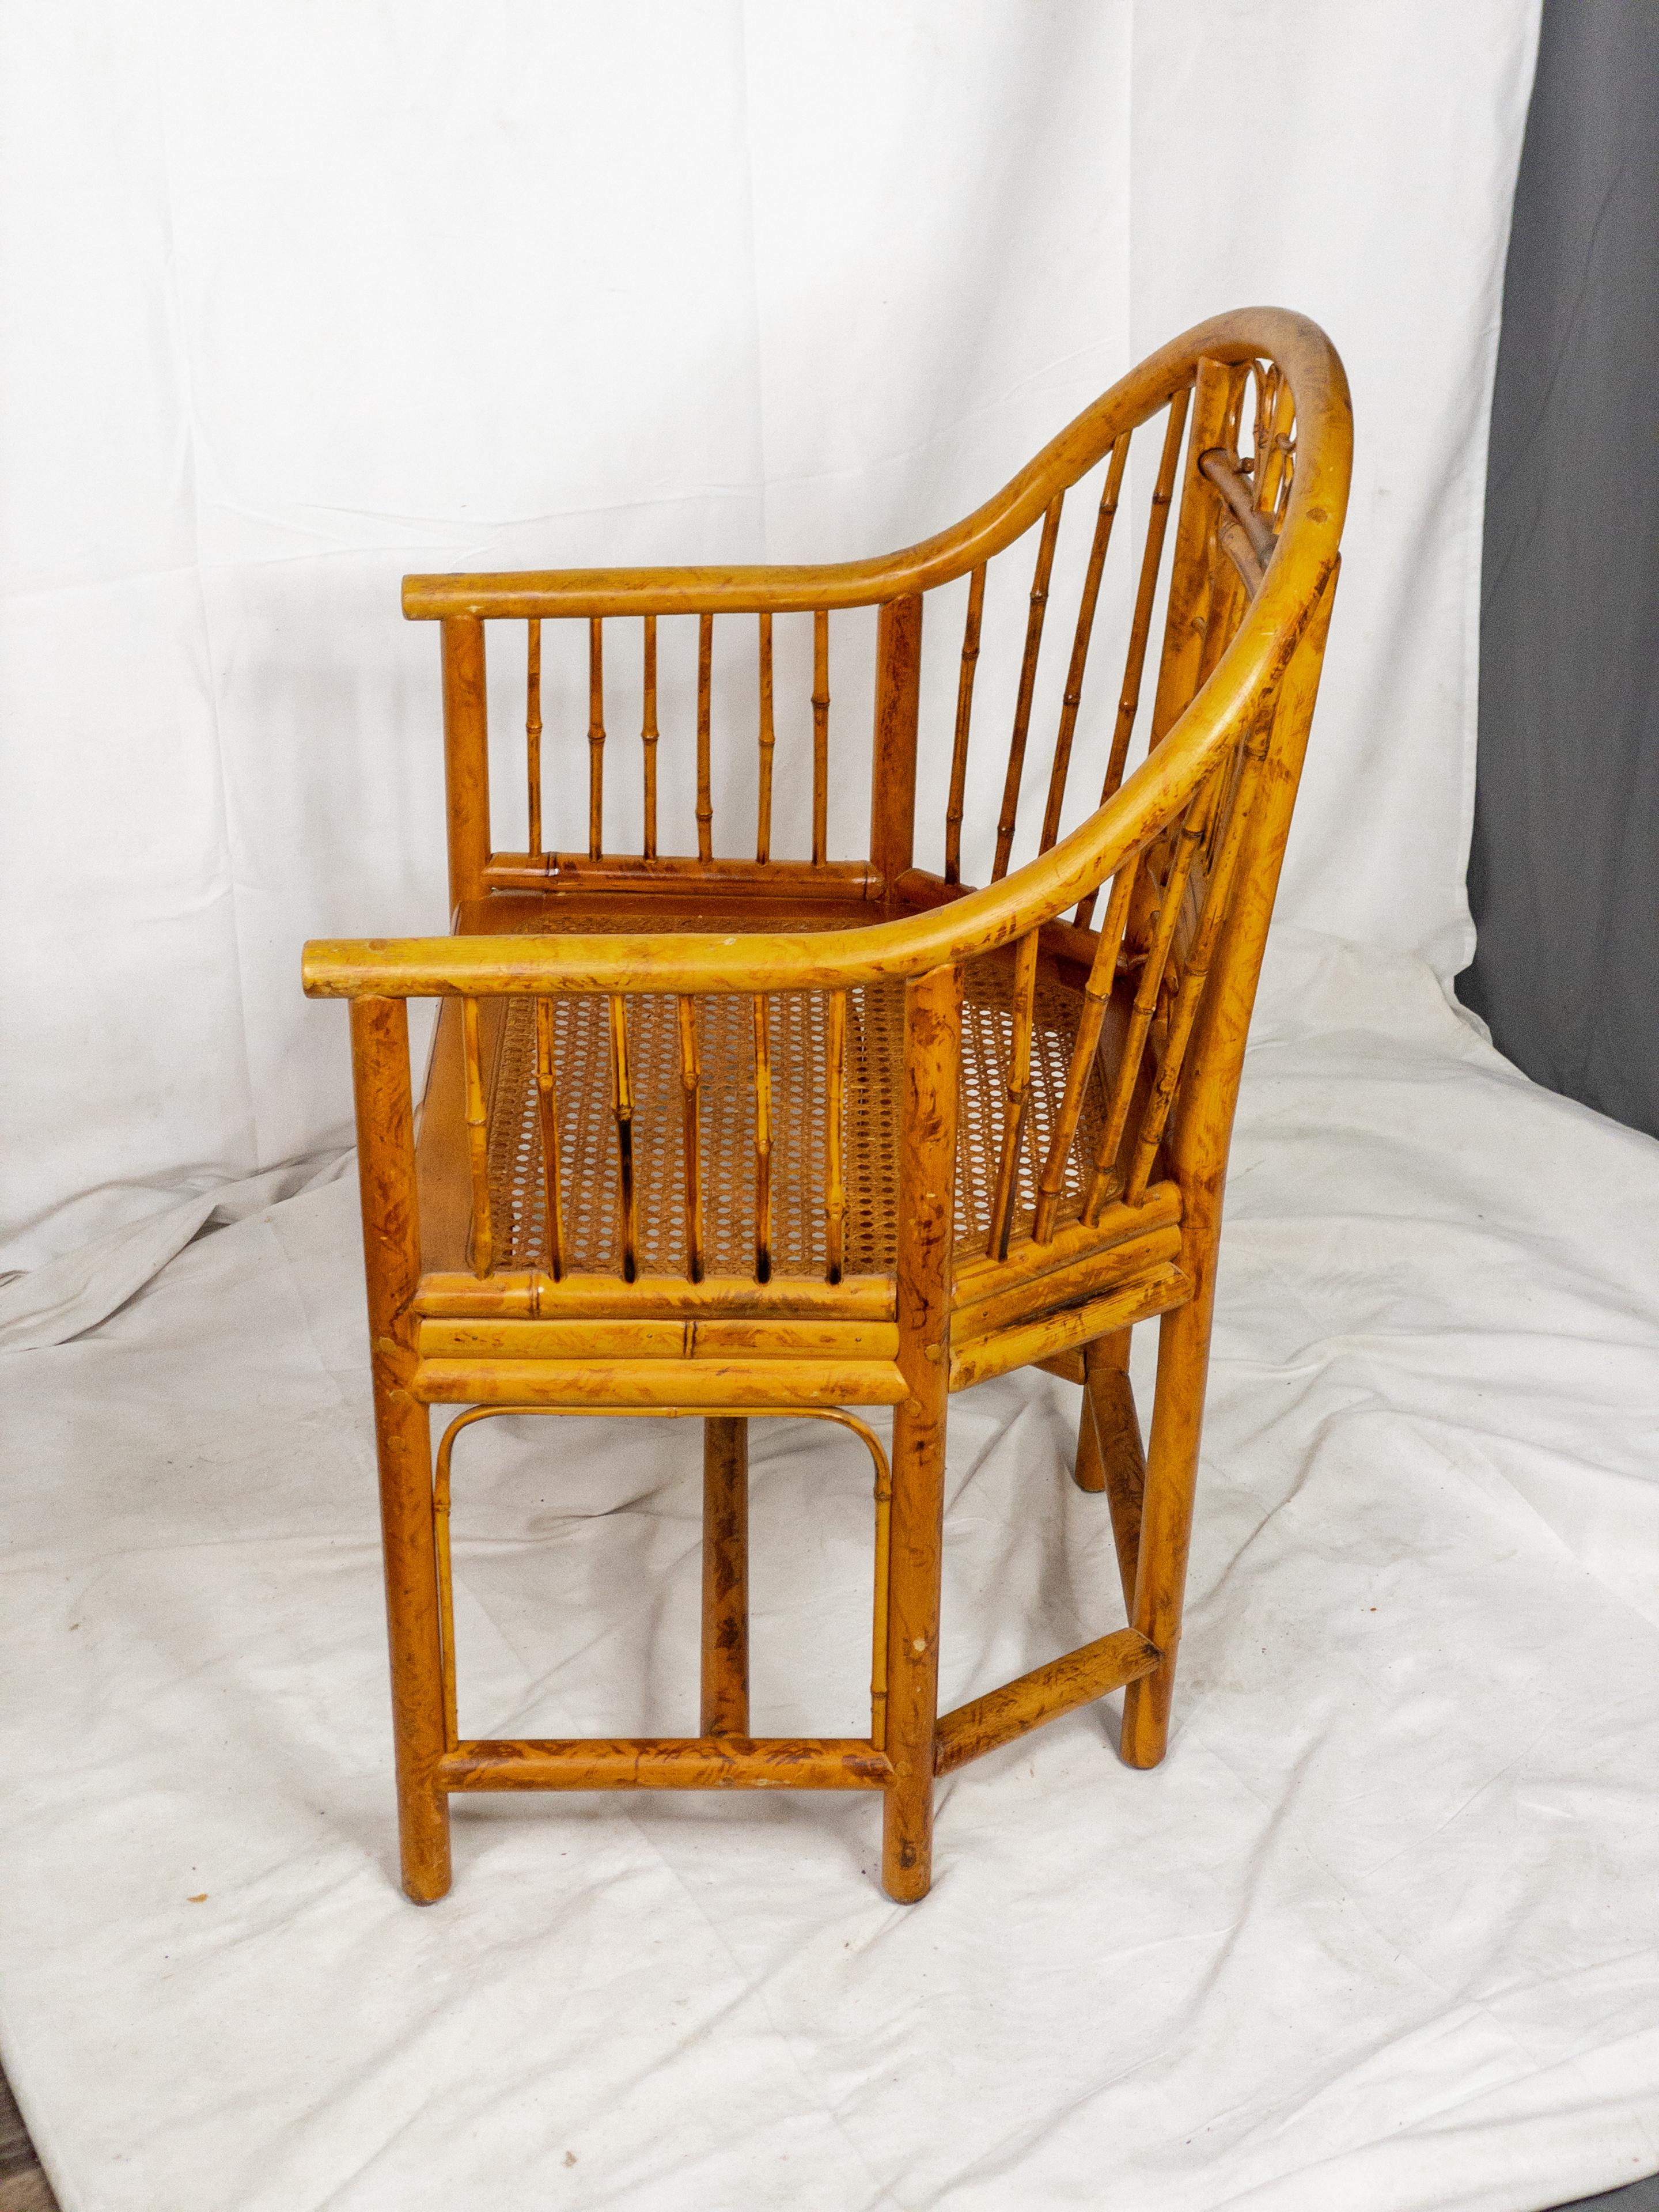 Caning Mid Century Brighton Pavilion Style Caned Seat Bamboo Chair For Sale